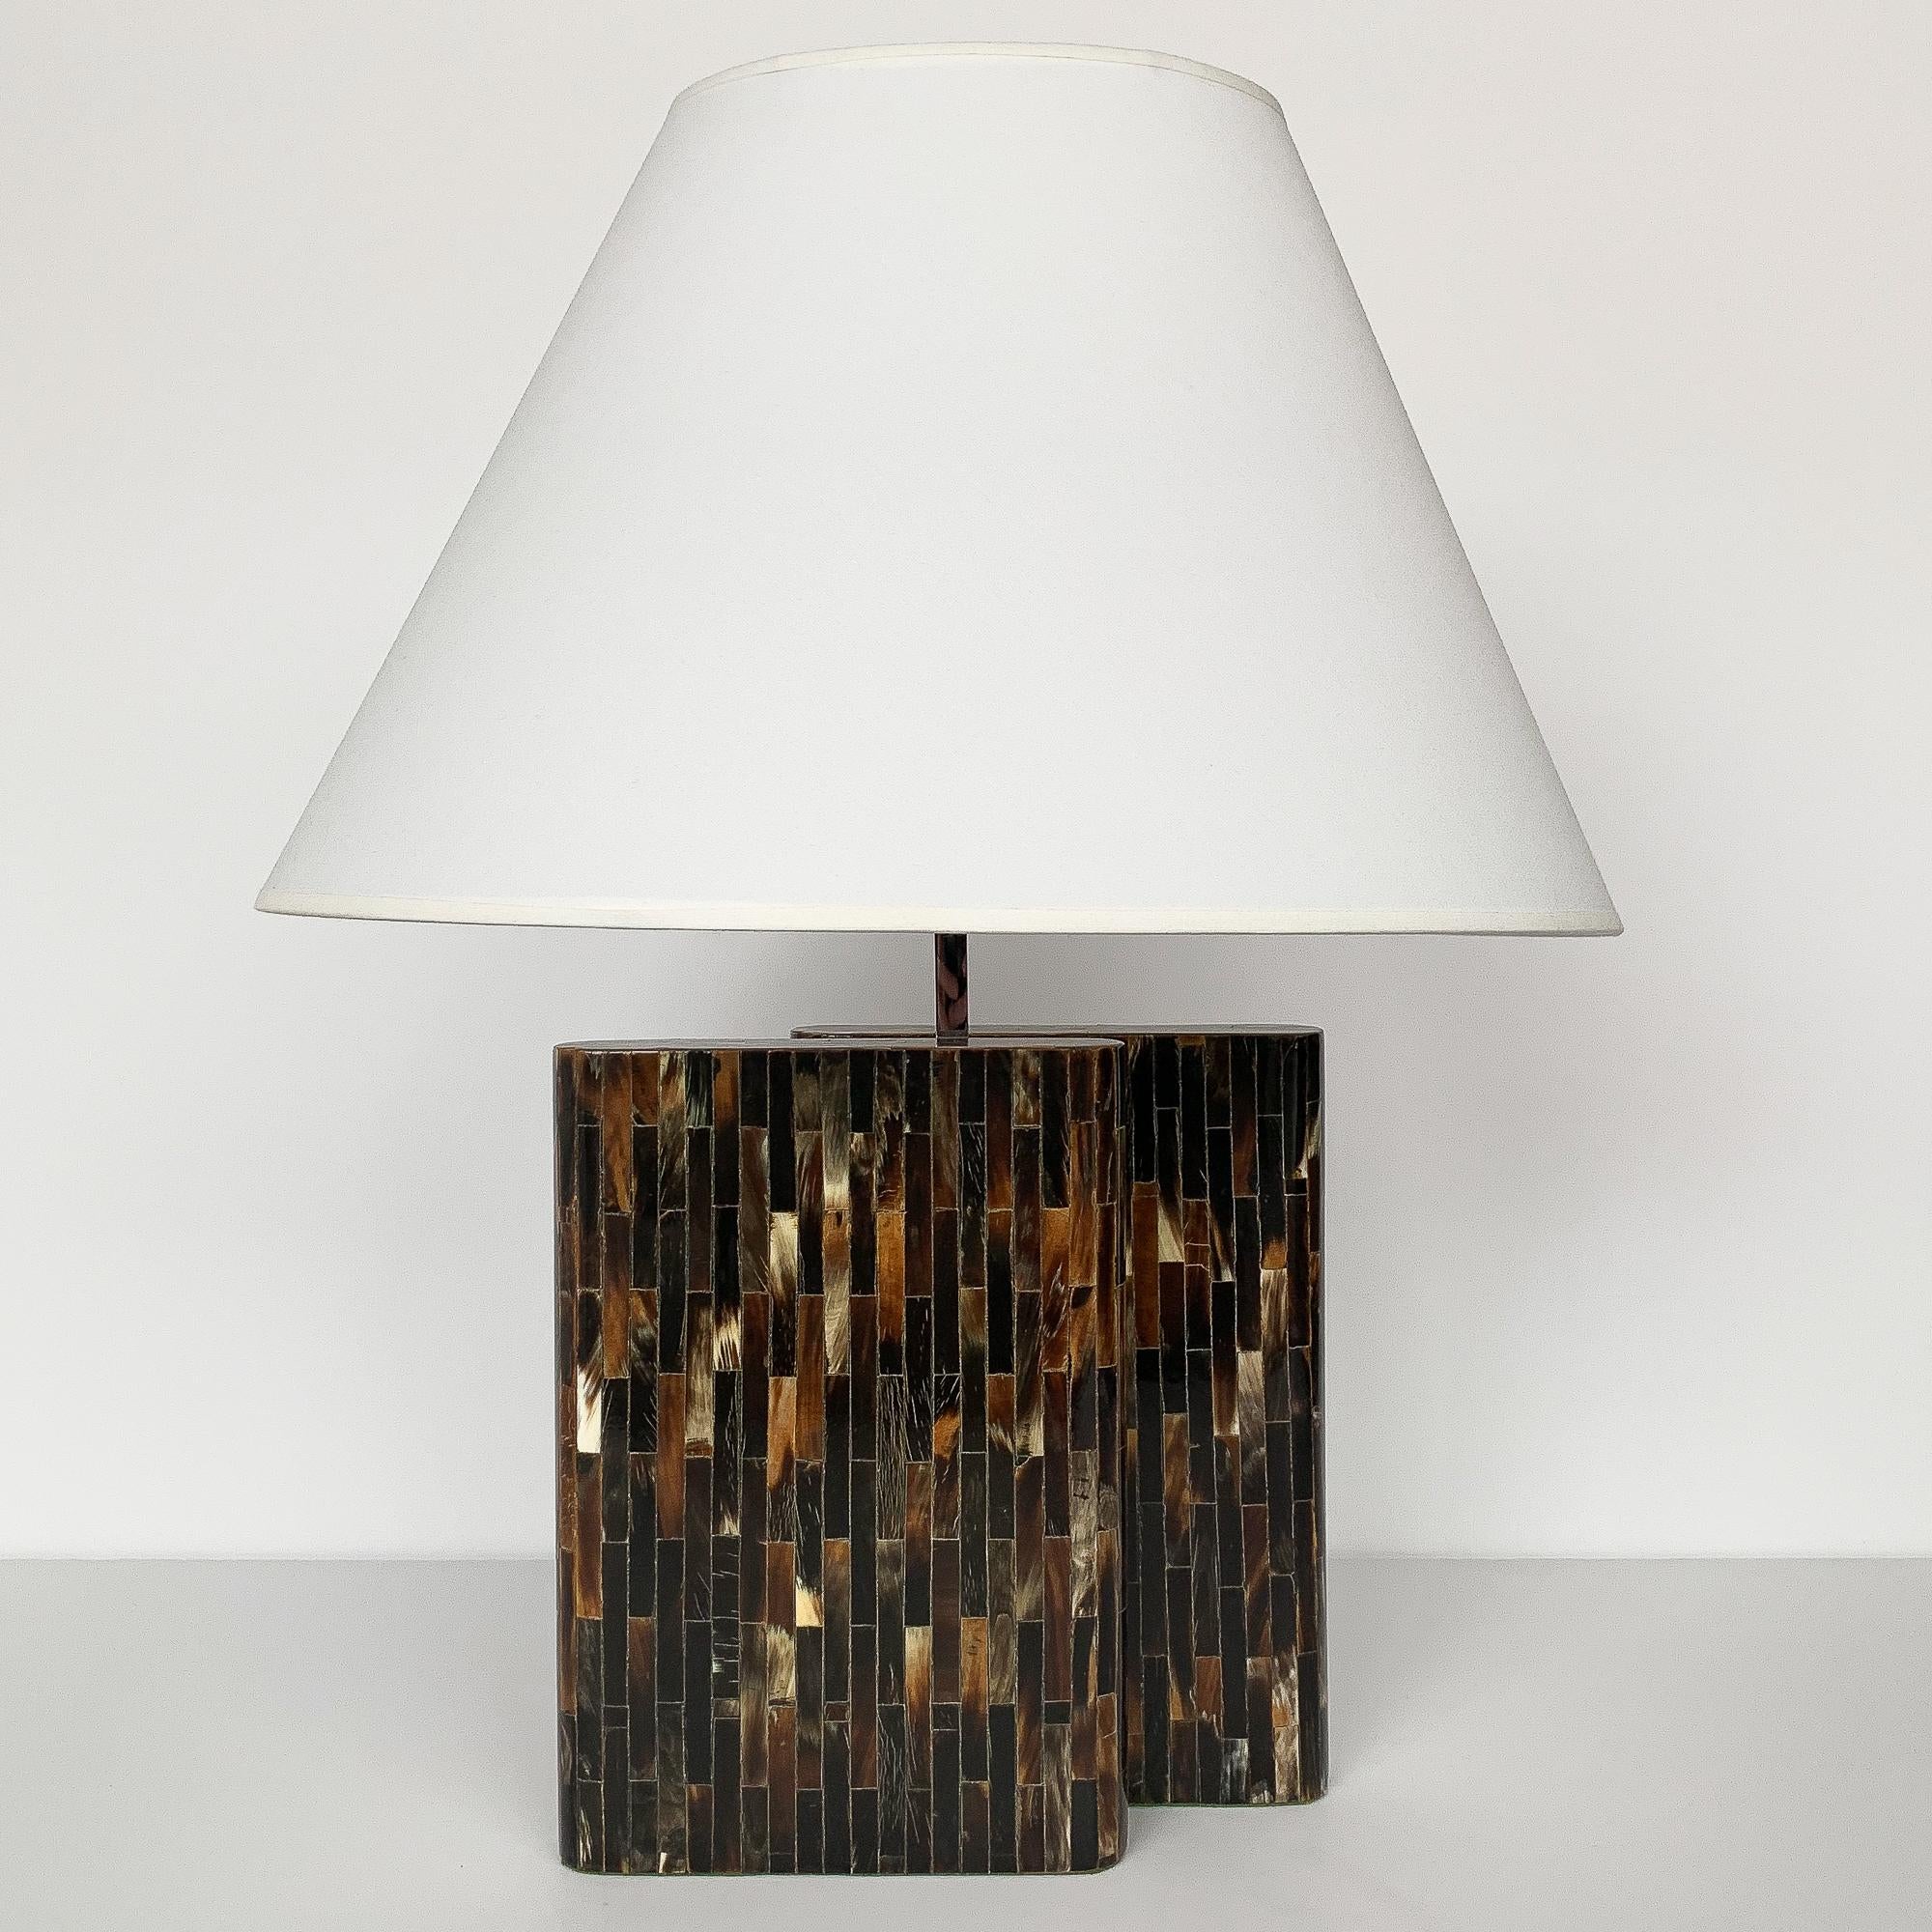 Tessellated natural horn table lamp by Enrique Garcel, circa 1970s. Two 8.5